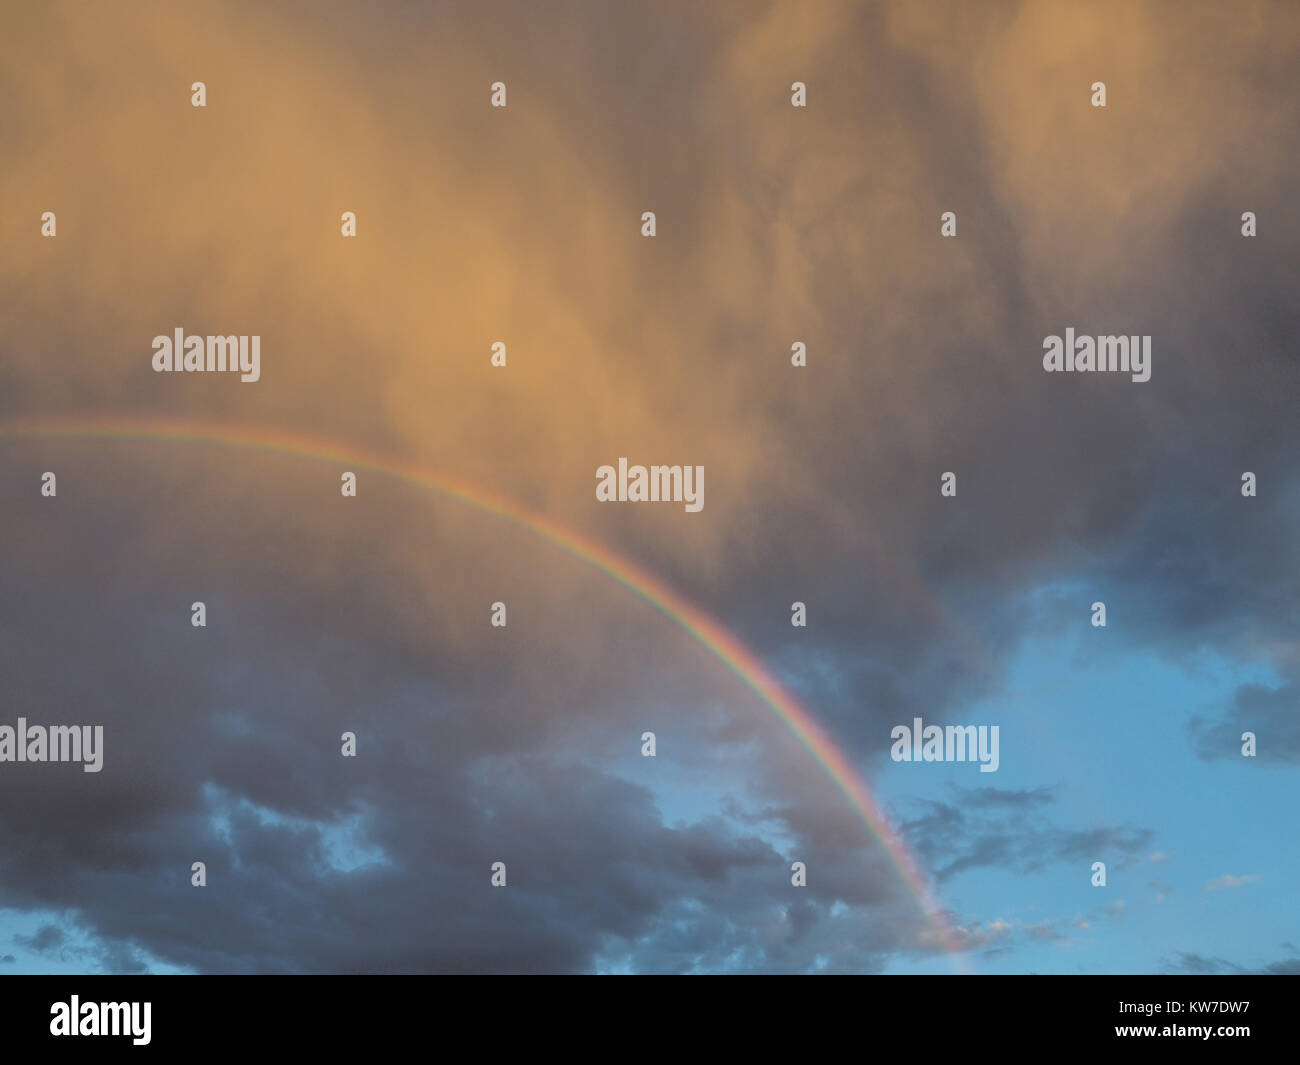 Semicircle of different colors a bright rainbow in a gray cloudy sky, illuminated by the rays of the setting sun. Stock Photo